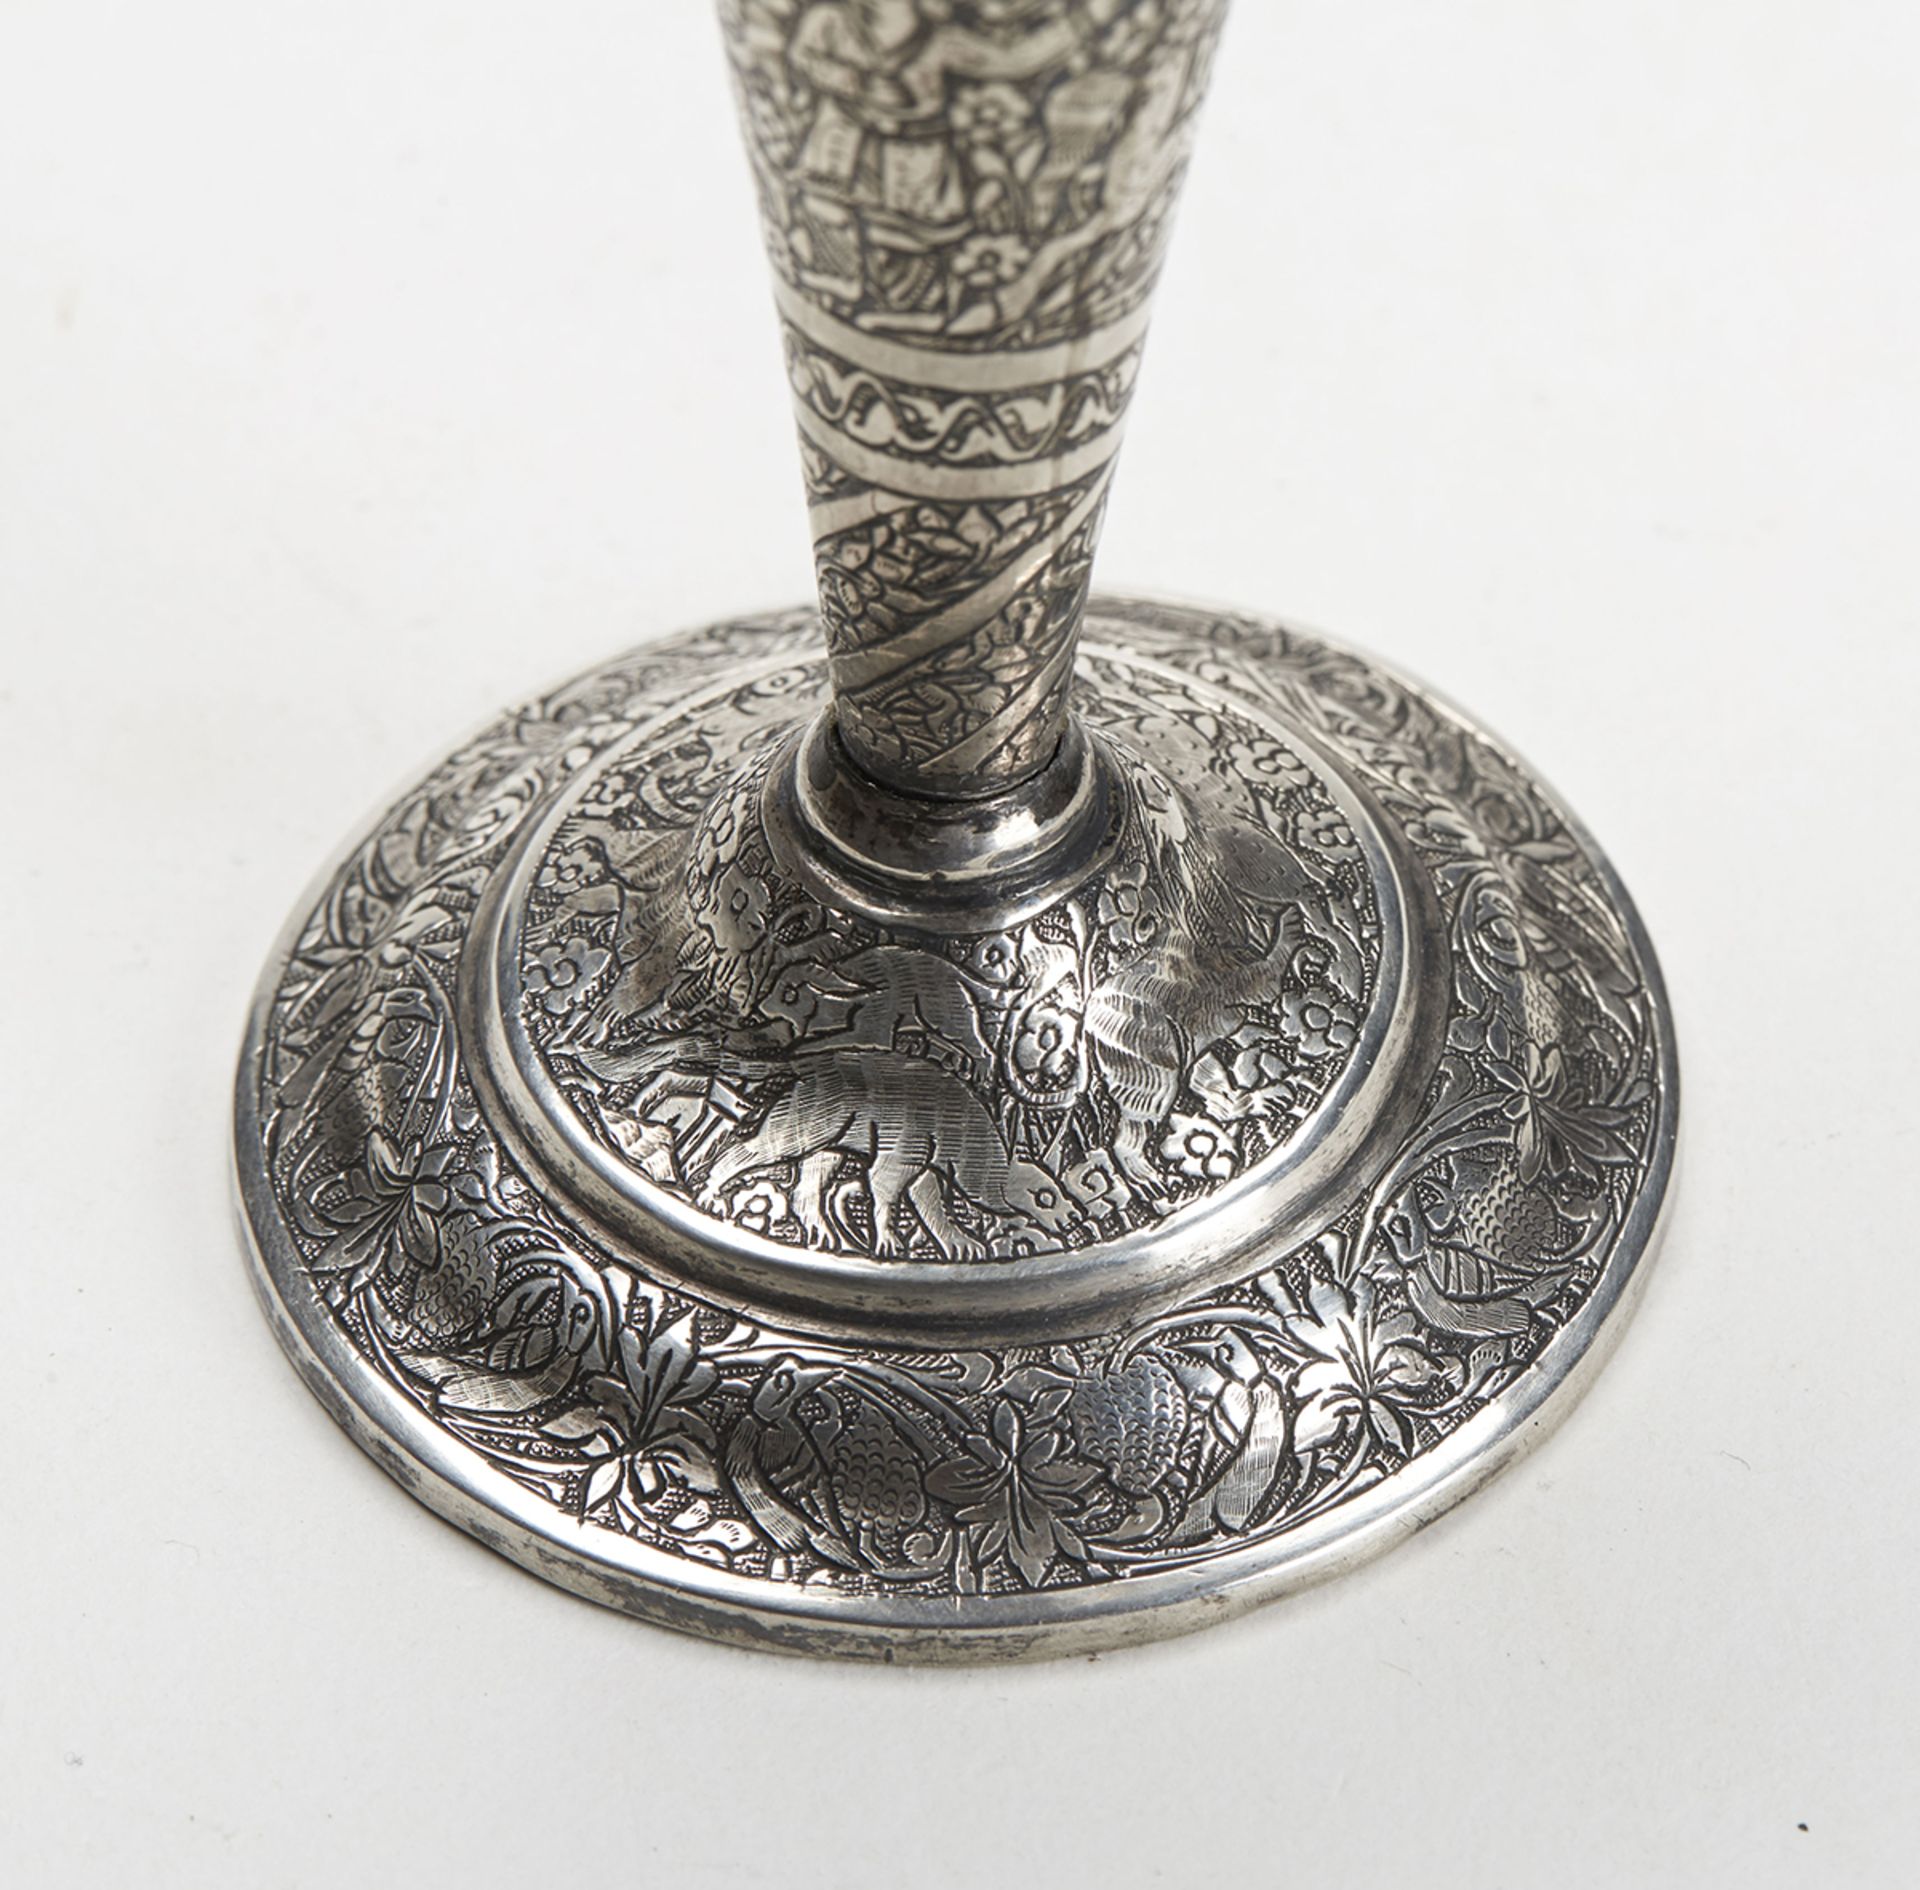 Antique Indian/Asian Silver Figural Vase 19Th C. - Image 7 of 9